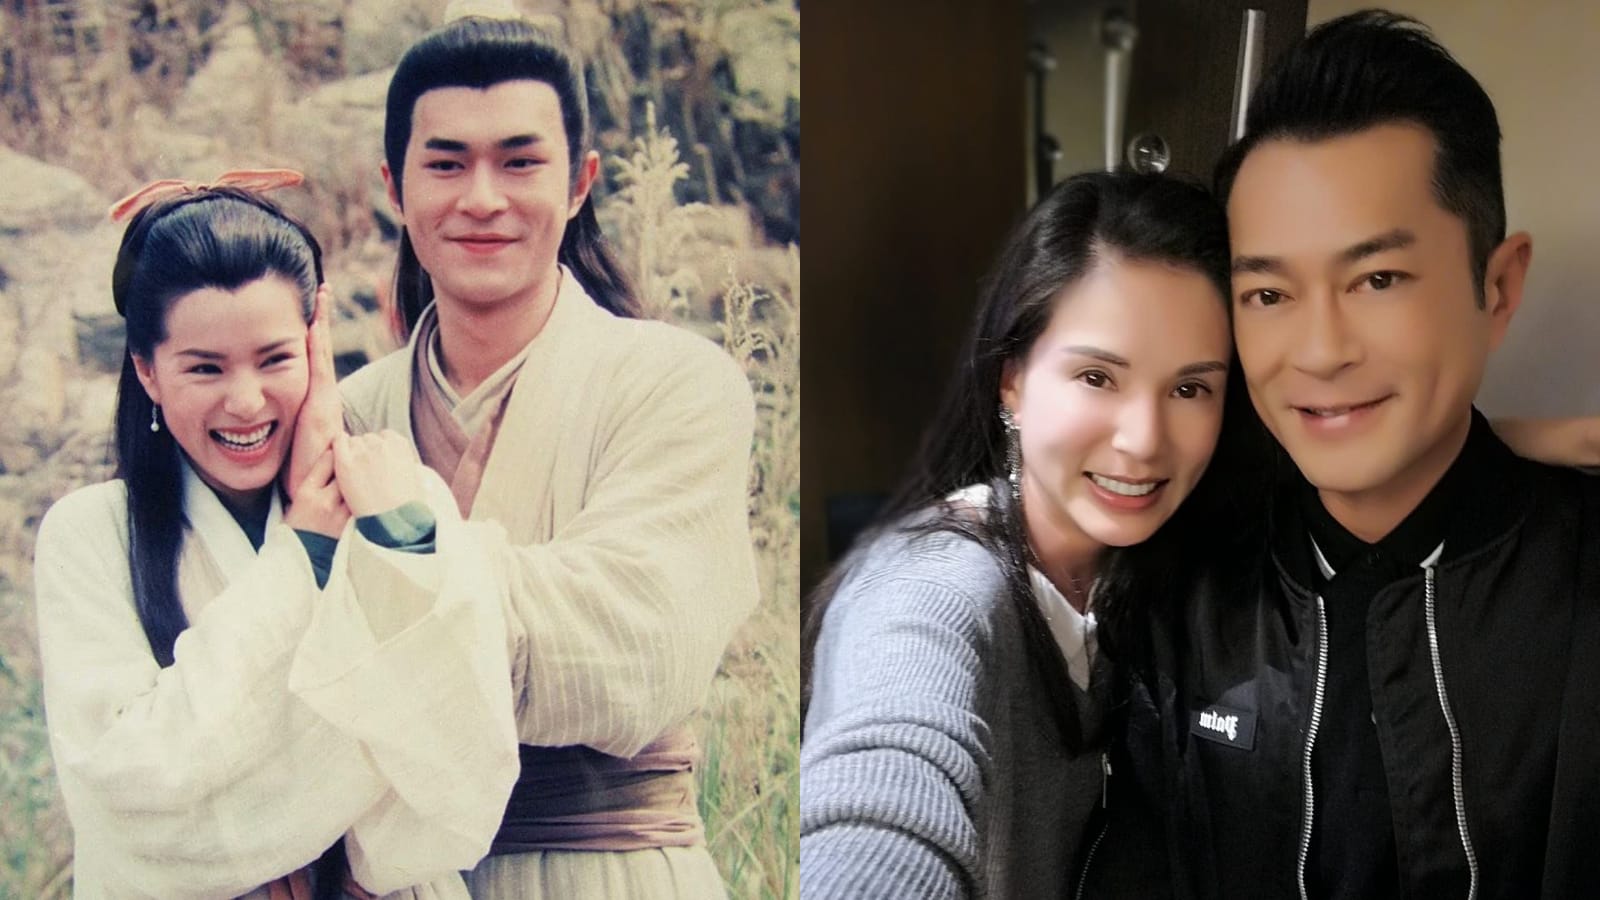 Carman Lee Admits She Really Fell In Love With Louis Koo In The Condor Heroes 95, But They Were Too Busy To Date